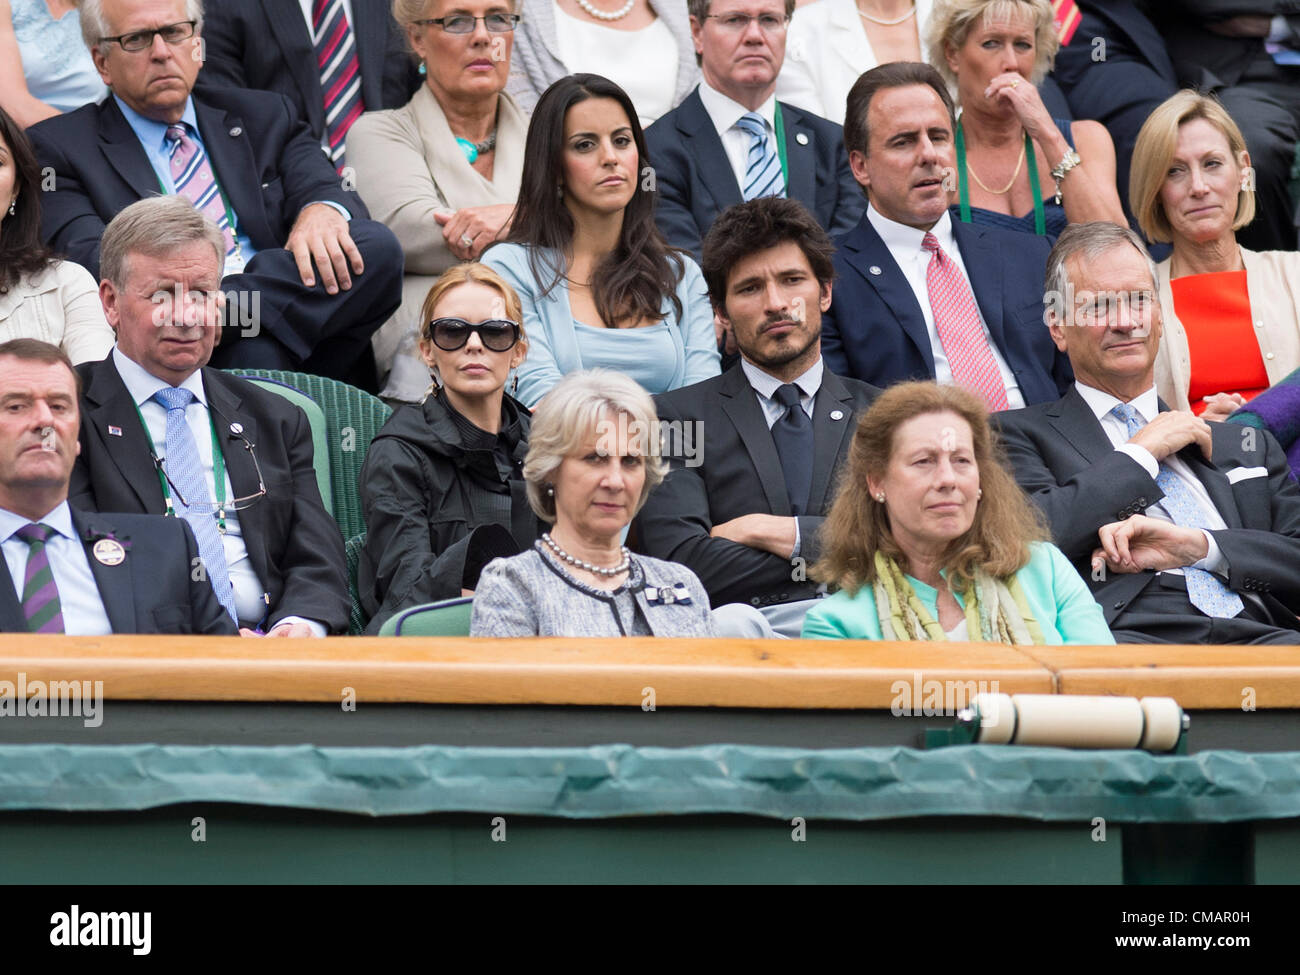 06.07.2012. The Wimbledon Tennis Championships 2012 held at The All England Lawn Tennis and Croquet Club, London, England, UK.  Novak DJOKOVIC (SRB) [1] v Roger FEDERER (SUI) [3]. Kylie Minogue (in black) watches the match. from the Royal Box. Federer reached his 24th Grand Slam final with a 6-3 3-6 6-4 6-3 win over Djokovic. Stock Photo